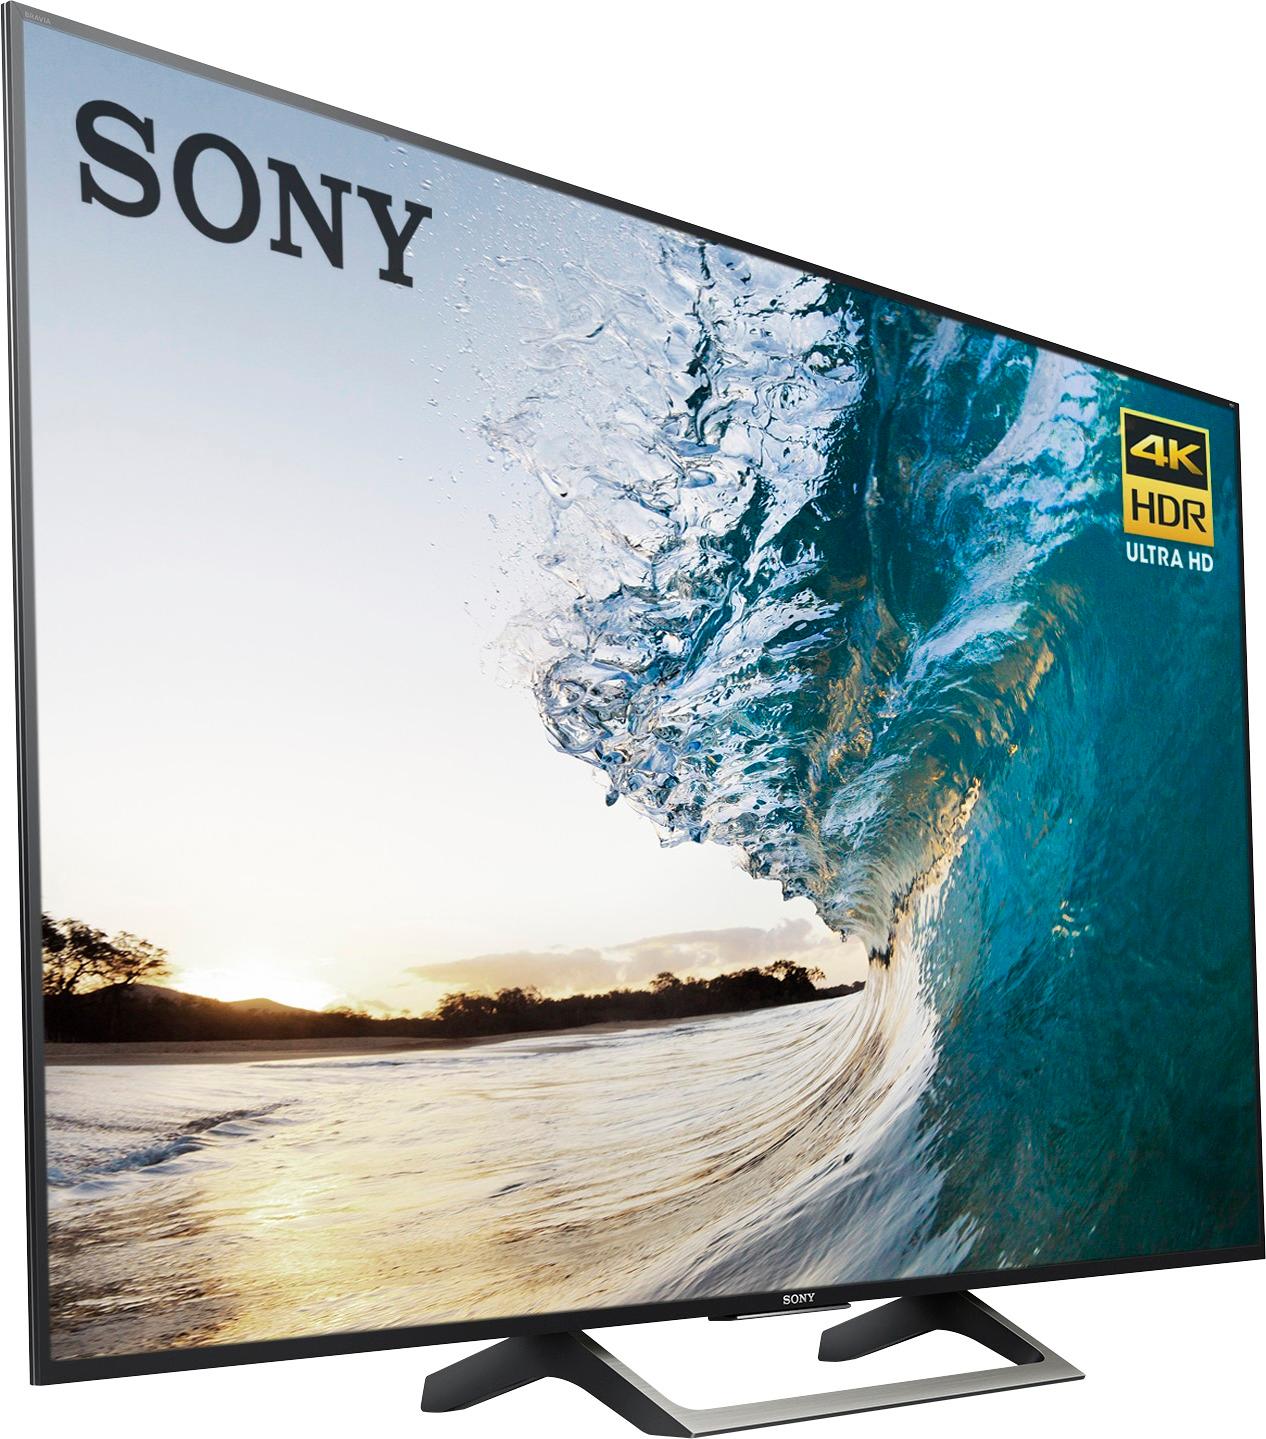 Huge 4K TV sale: Save $800 on a 75-inch Sony TV at Best Buy, with mounting,  install, and shipping included